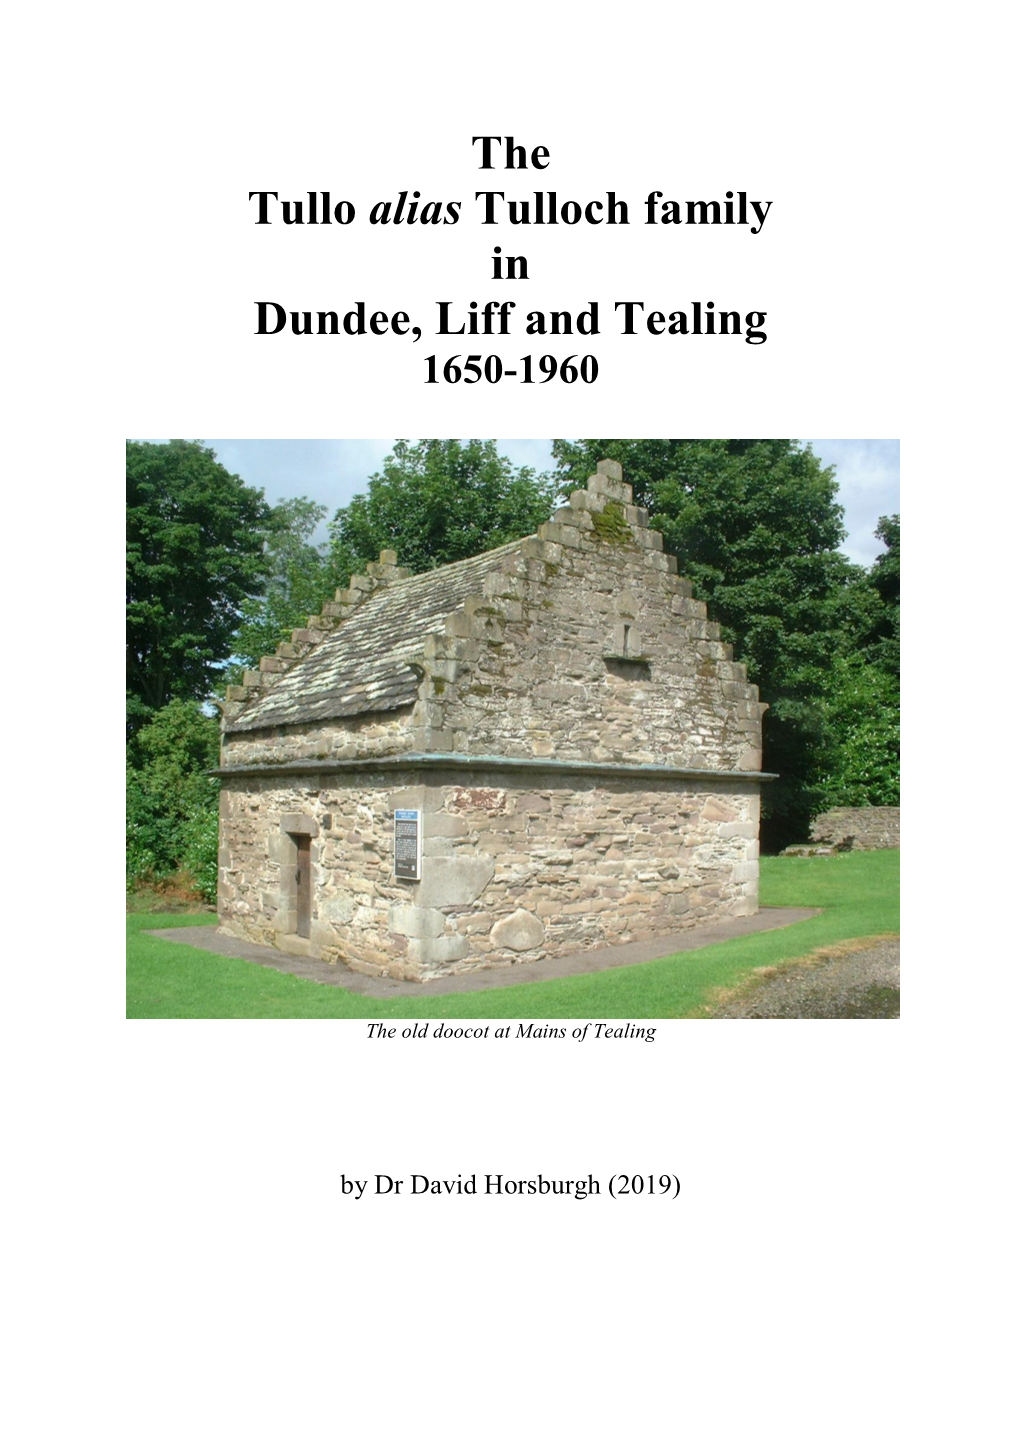 The Tullo Alias Tulloch Family in Dundee, Liff and Tealing 1650-1960